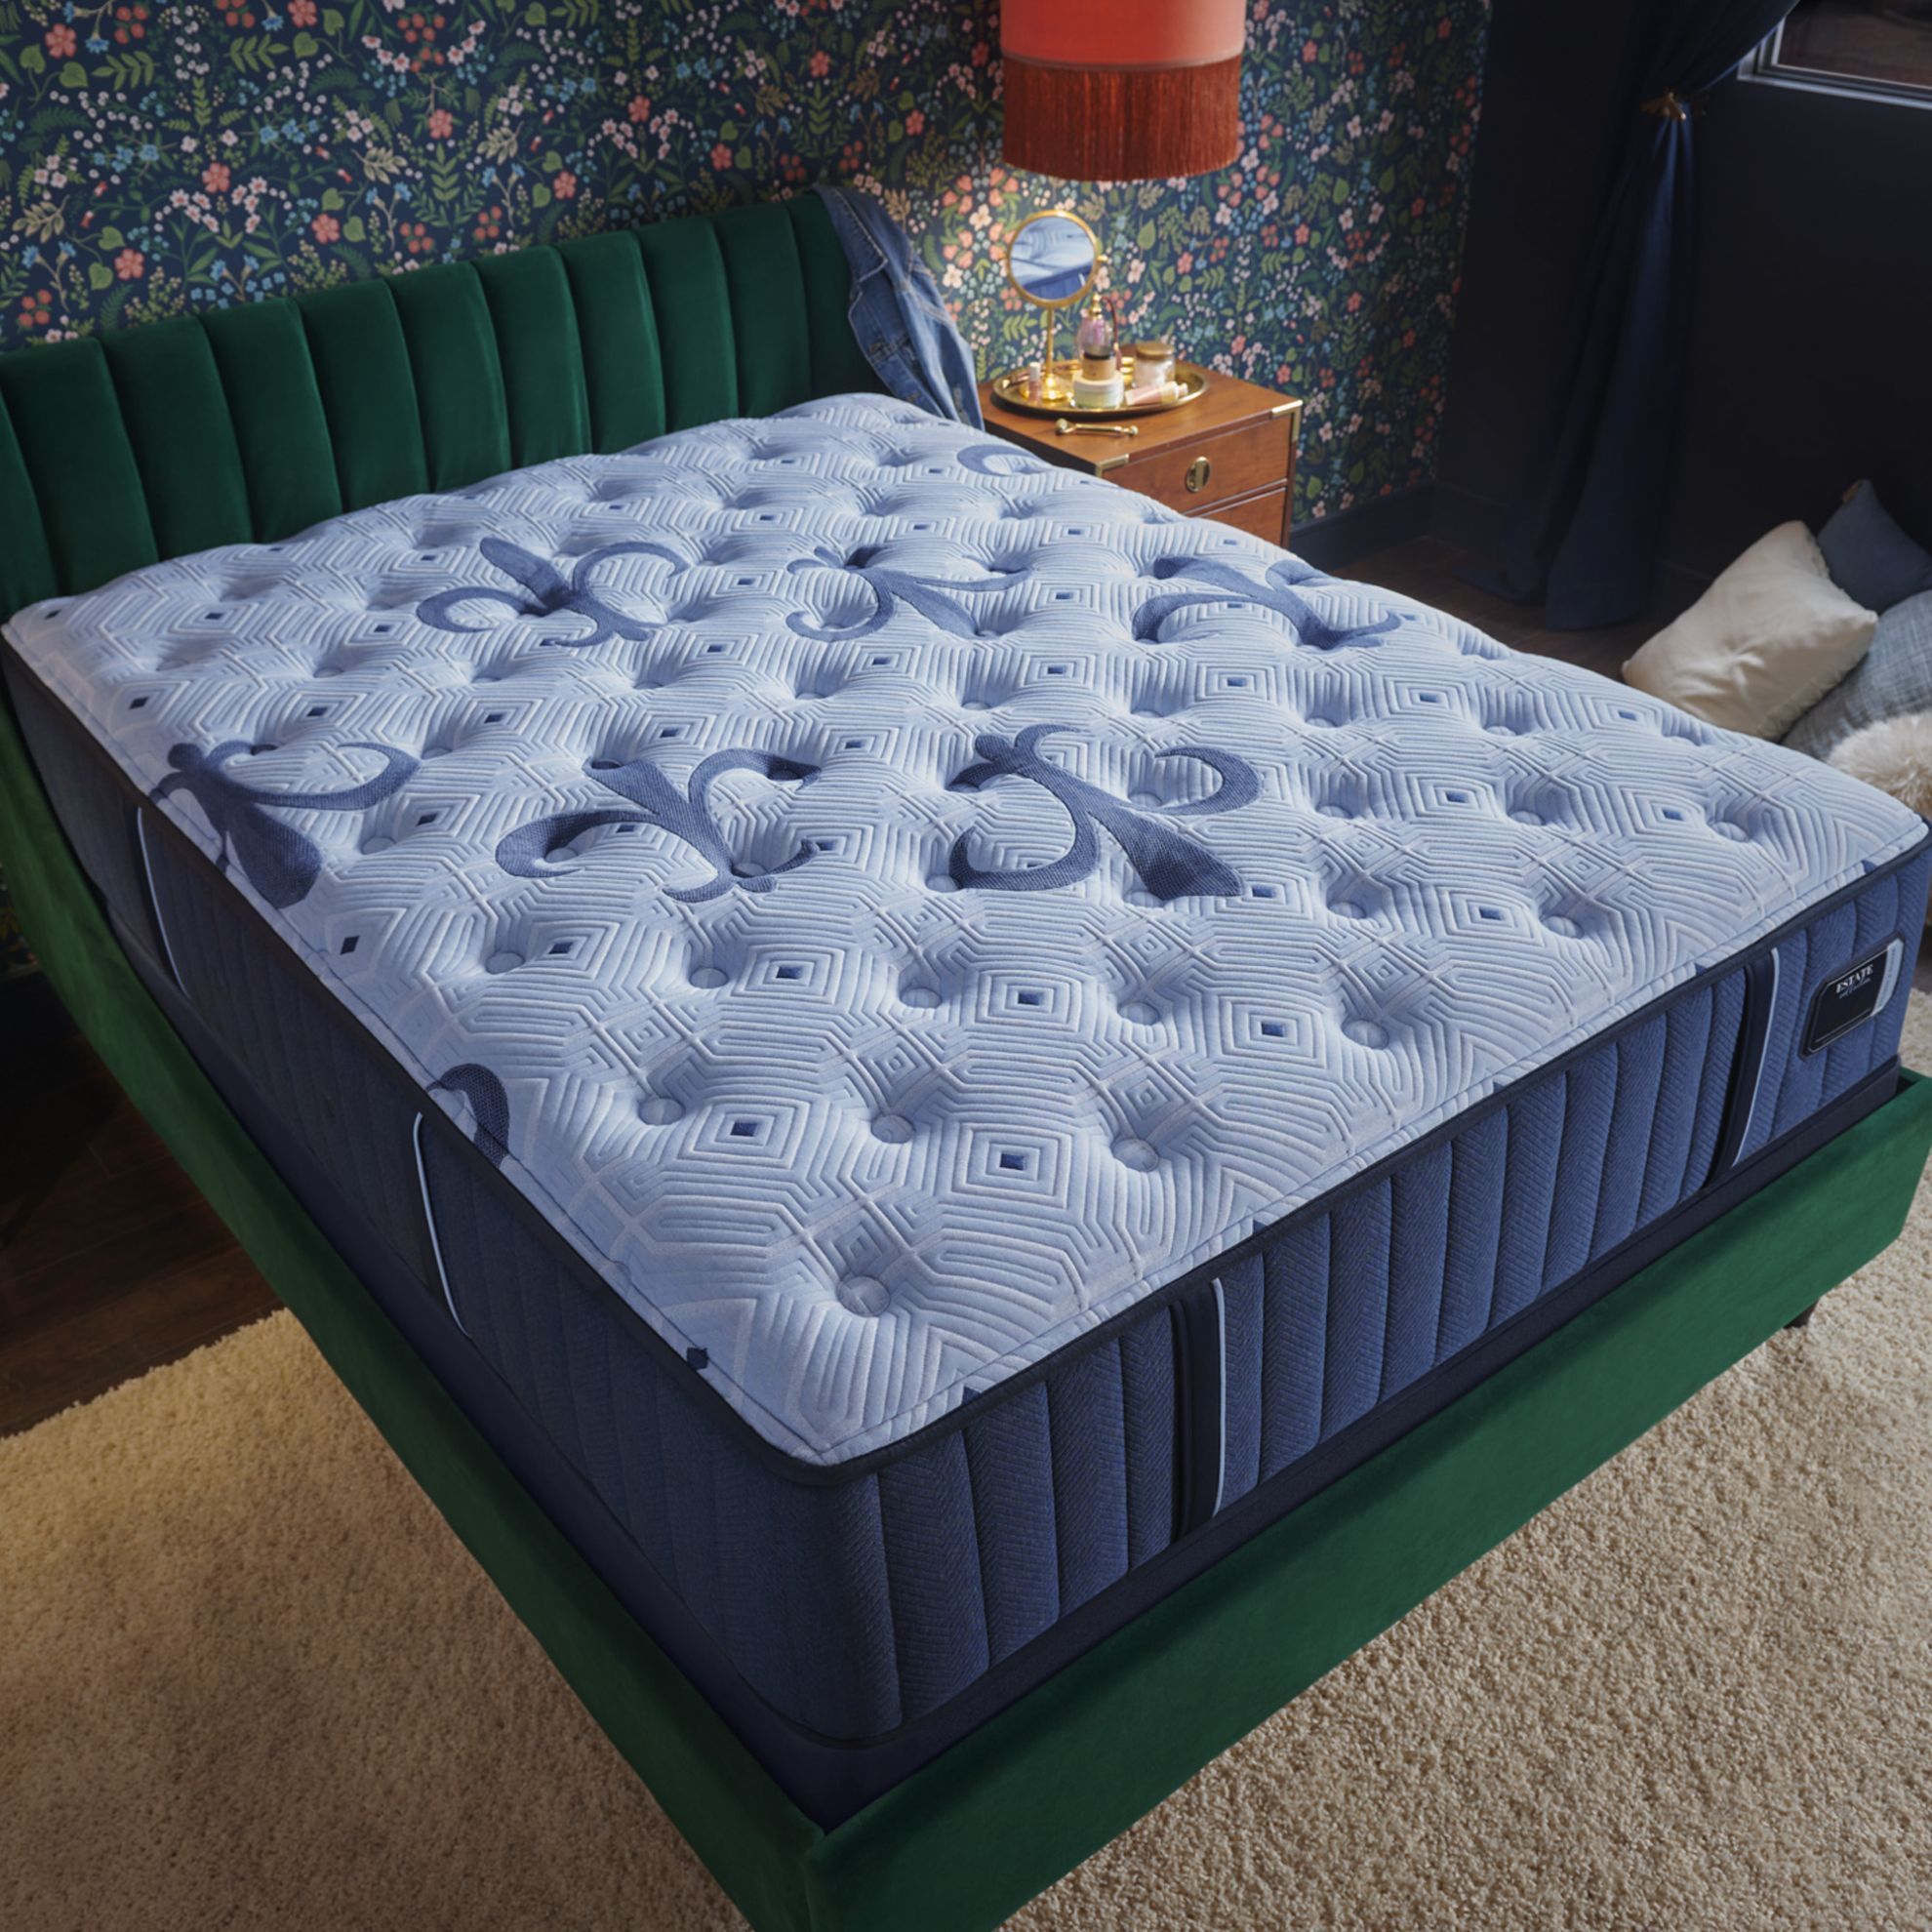 Picture of Luxury Estate Soft Full Mattress